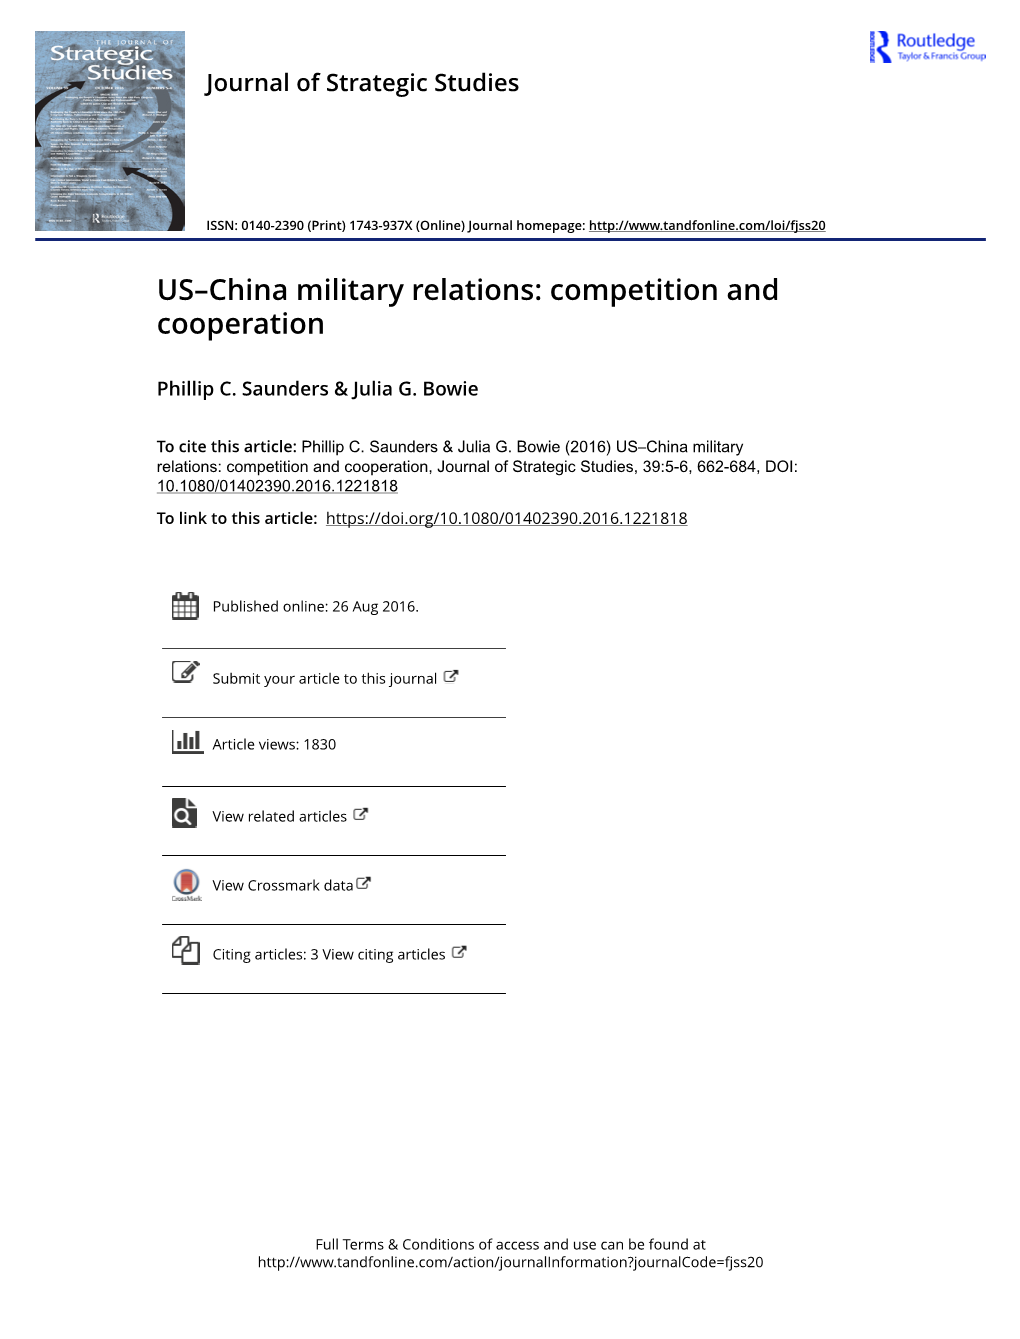 US–China Military Relations: Competition and Cooperation